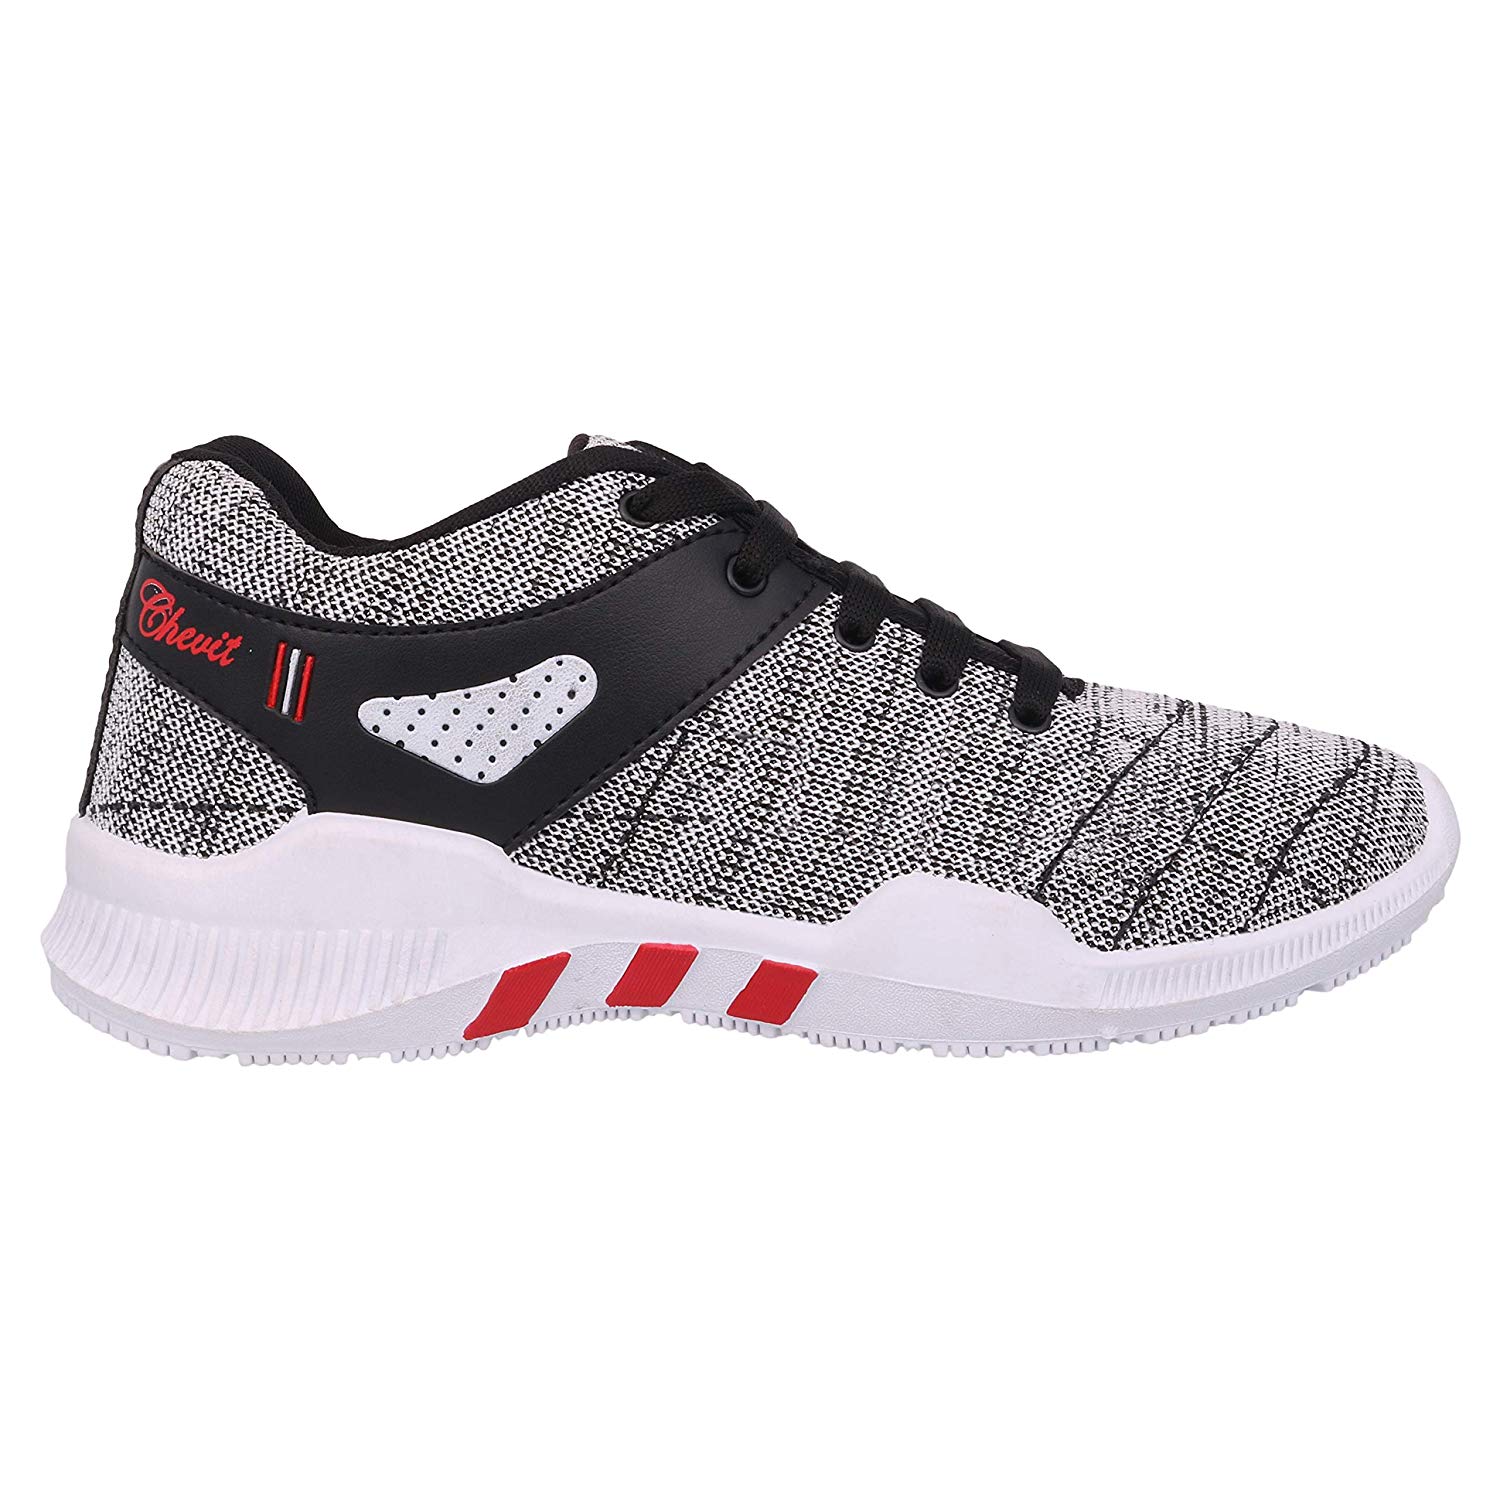 Buy Chevit 444 Grey Sports Shoes for Men's (Gym Walking Shoes) Running ...